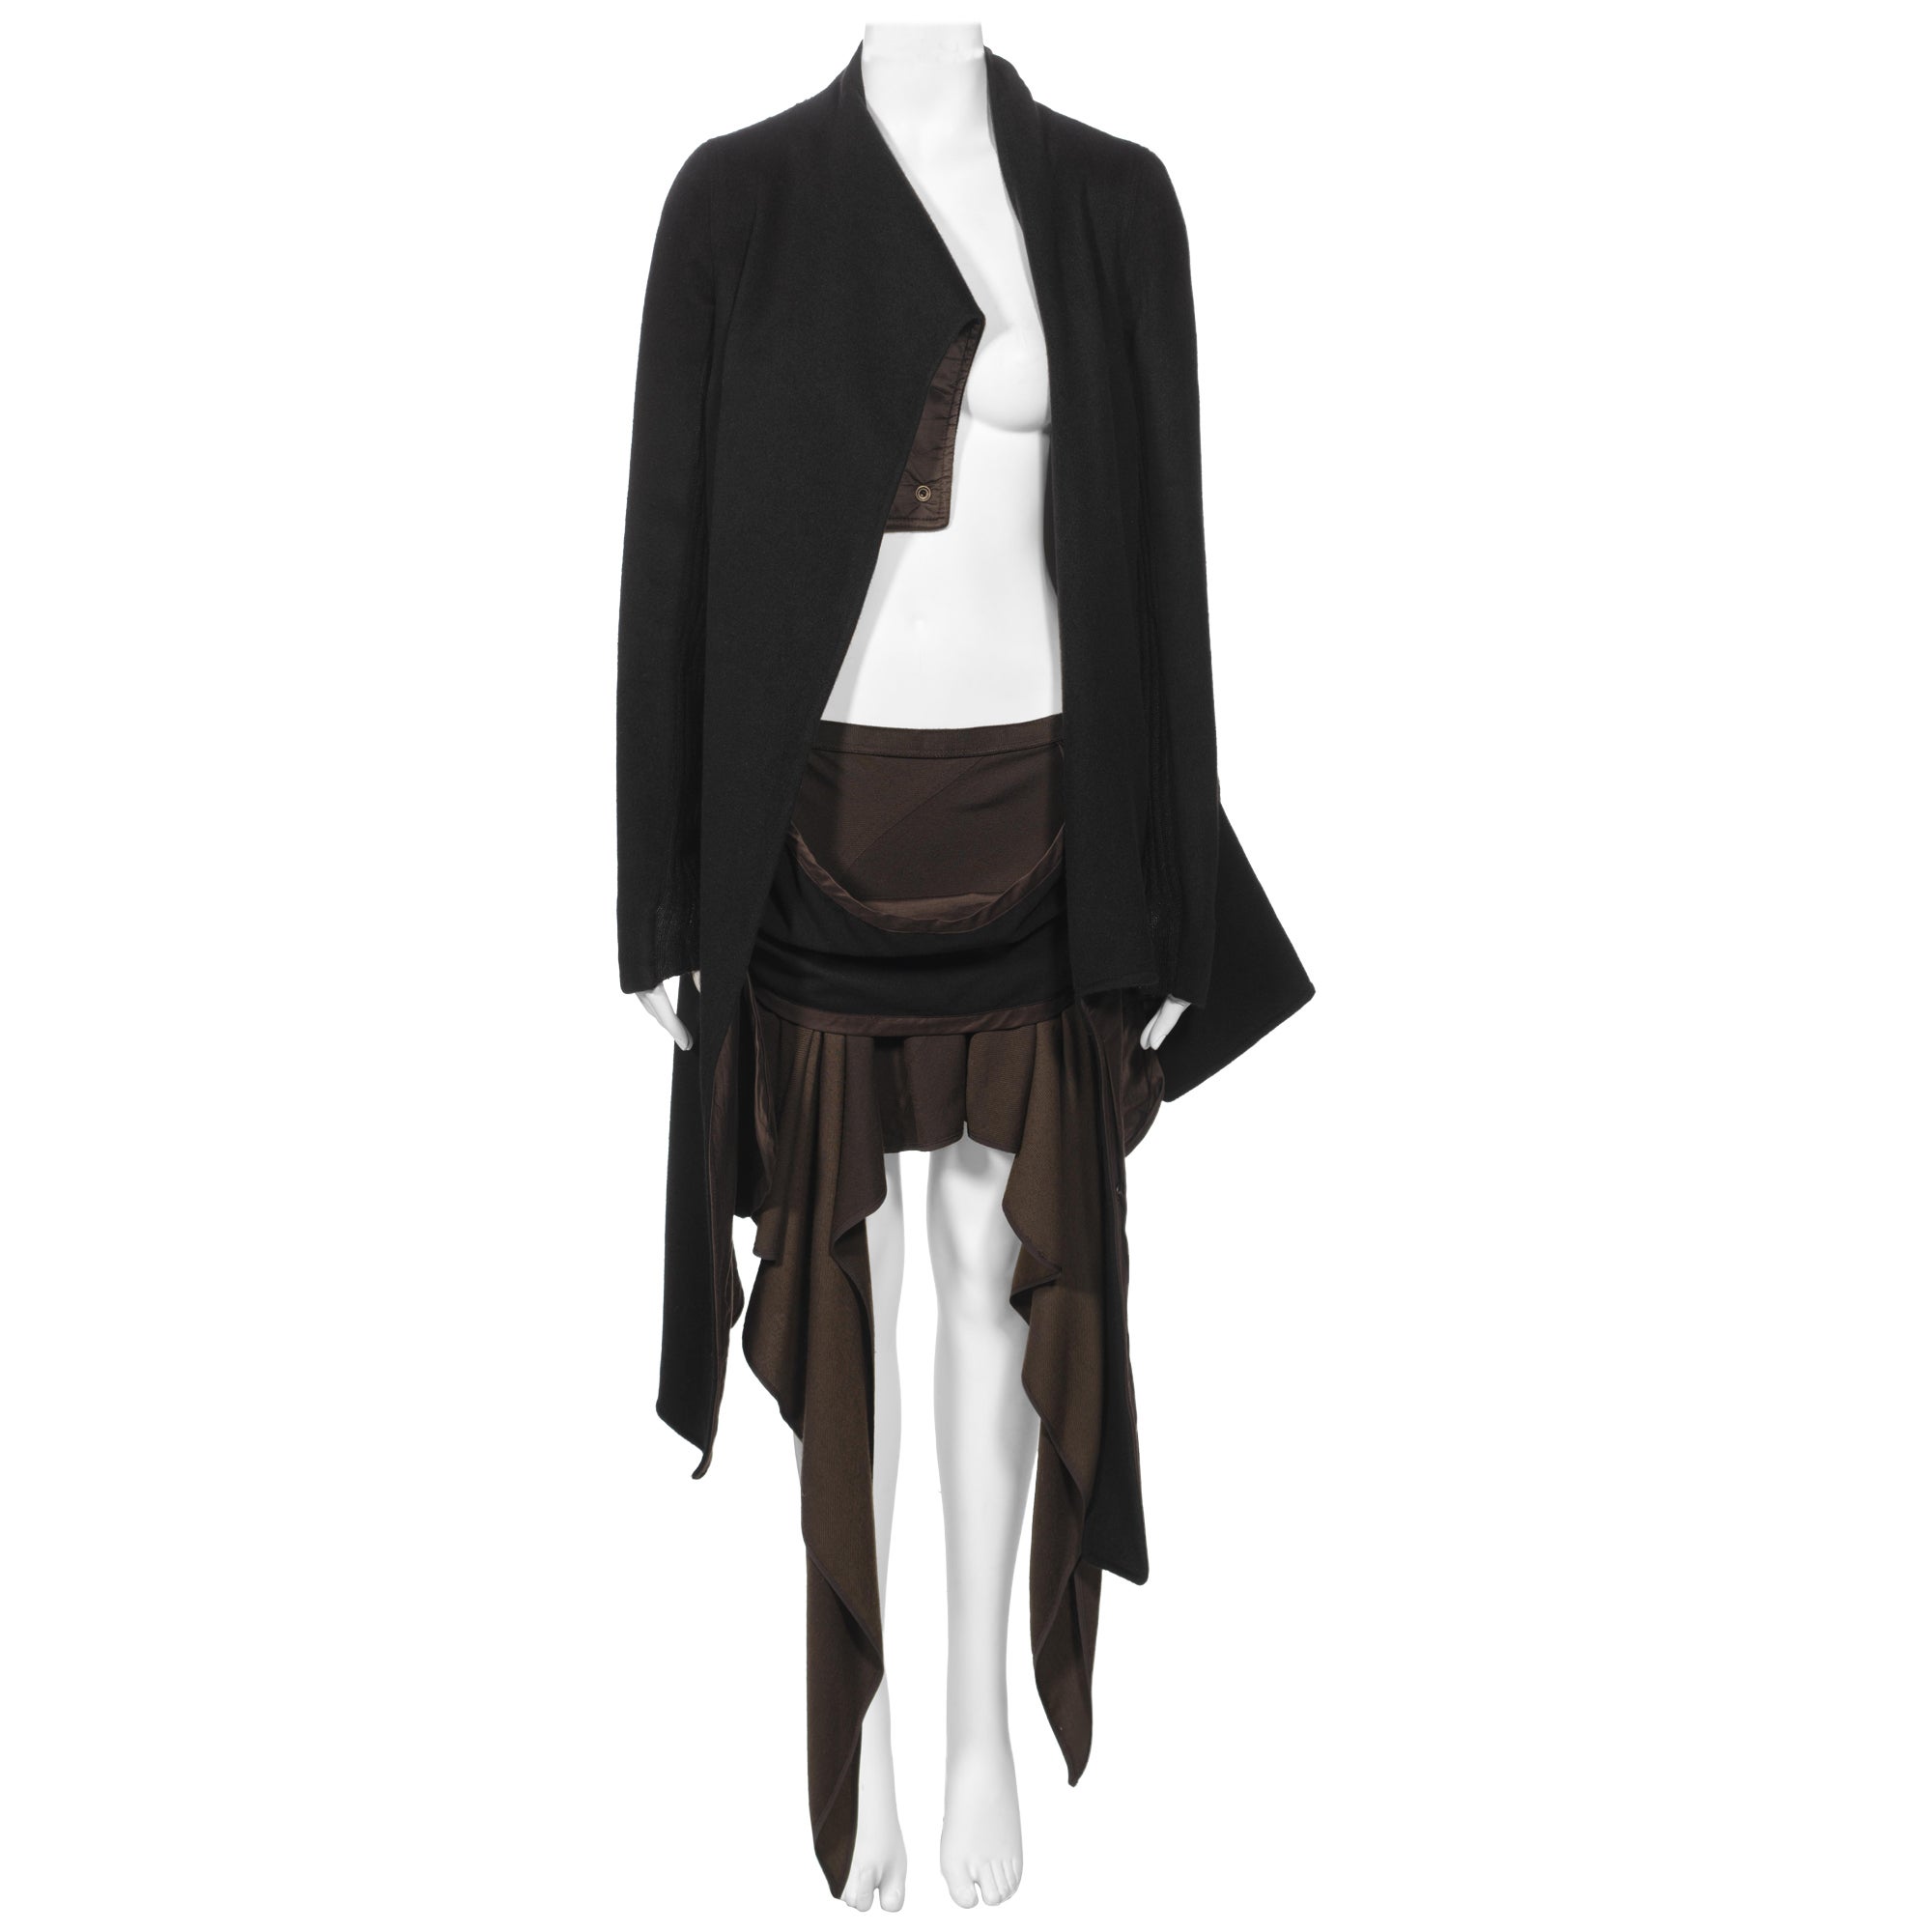 Rick Owens Angora Jacket and Cashmere Skirt 'Queen' Ensemble, fw 2004 For Sale